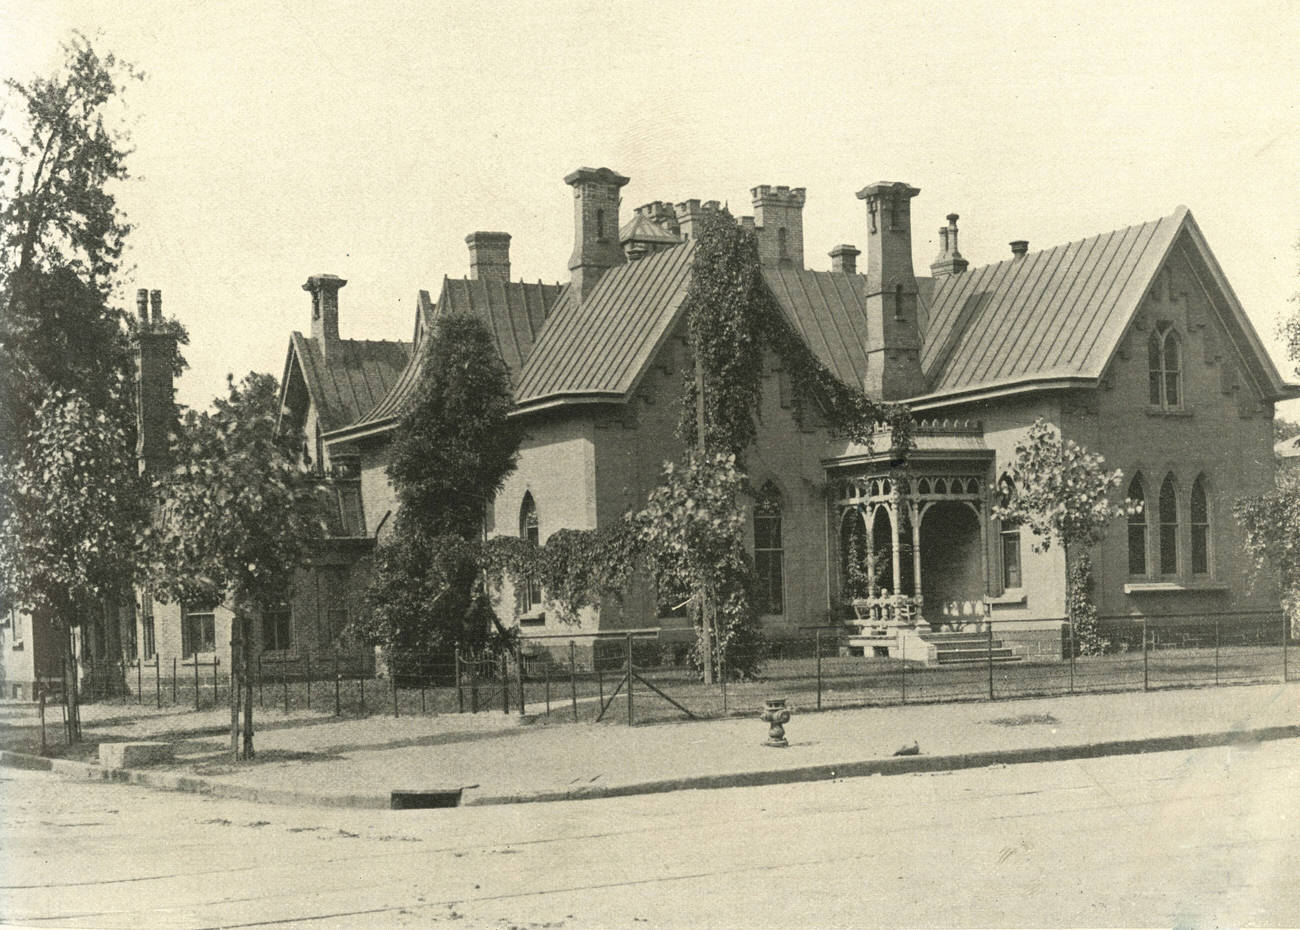 Hayden Homestead, formerly the Governor's mansion and later Knights of Columbus property, 1901.